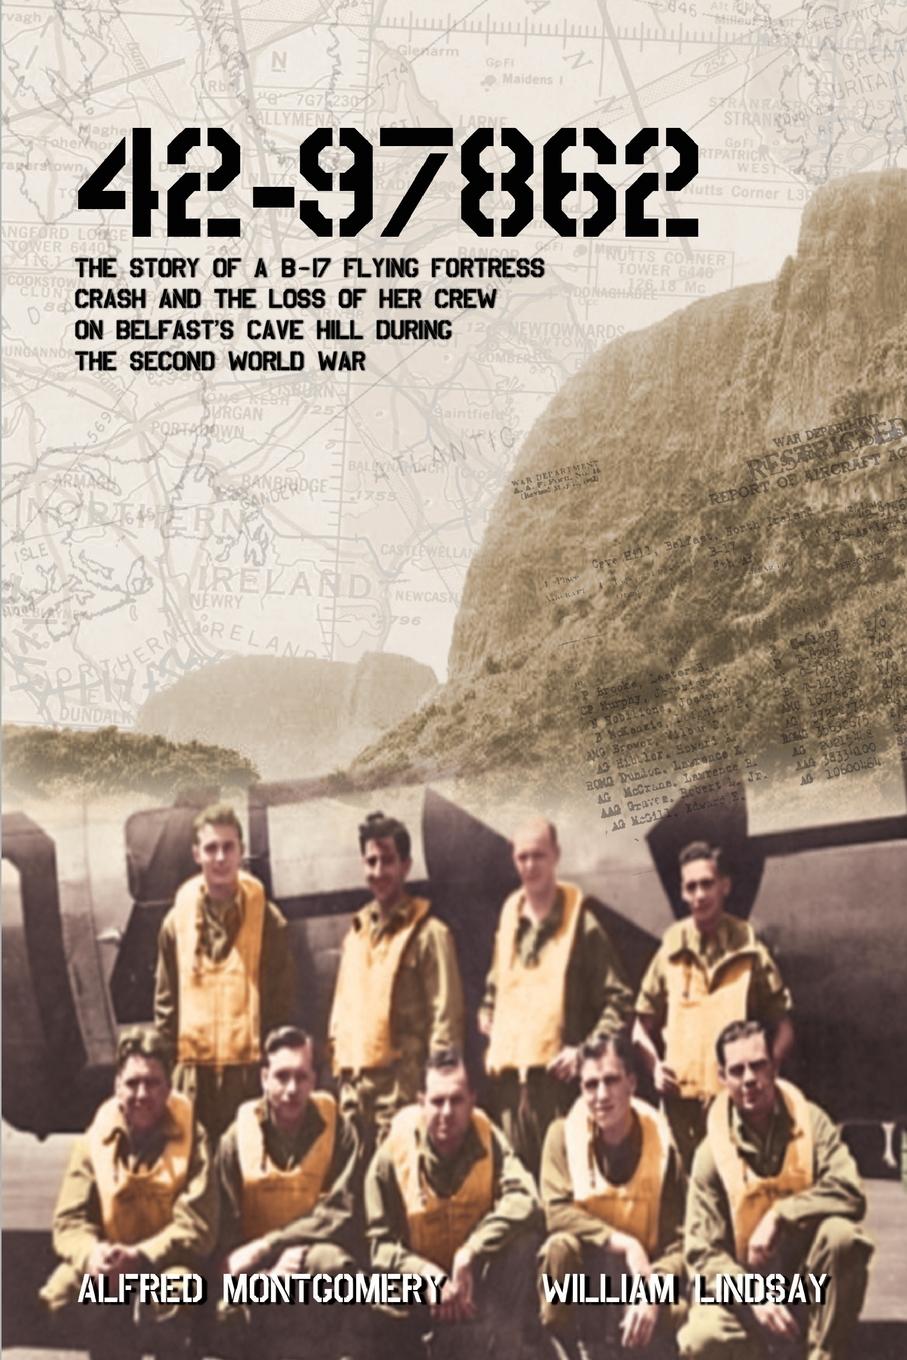 42-97862 - The Story of a B-17 Flying Fortress crash and the loss of her crew on Belfast s Cave Hill during the Second World War - Lindsay, William Montgomery, Alfred